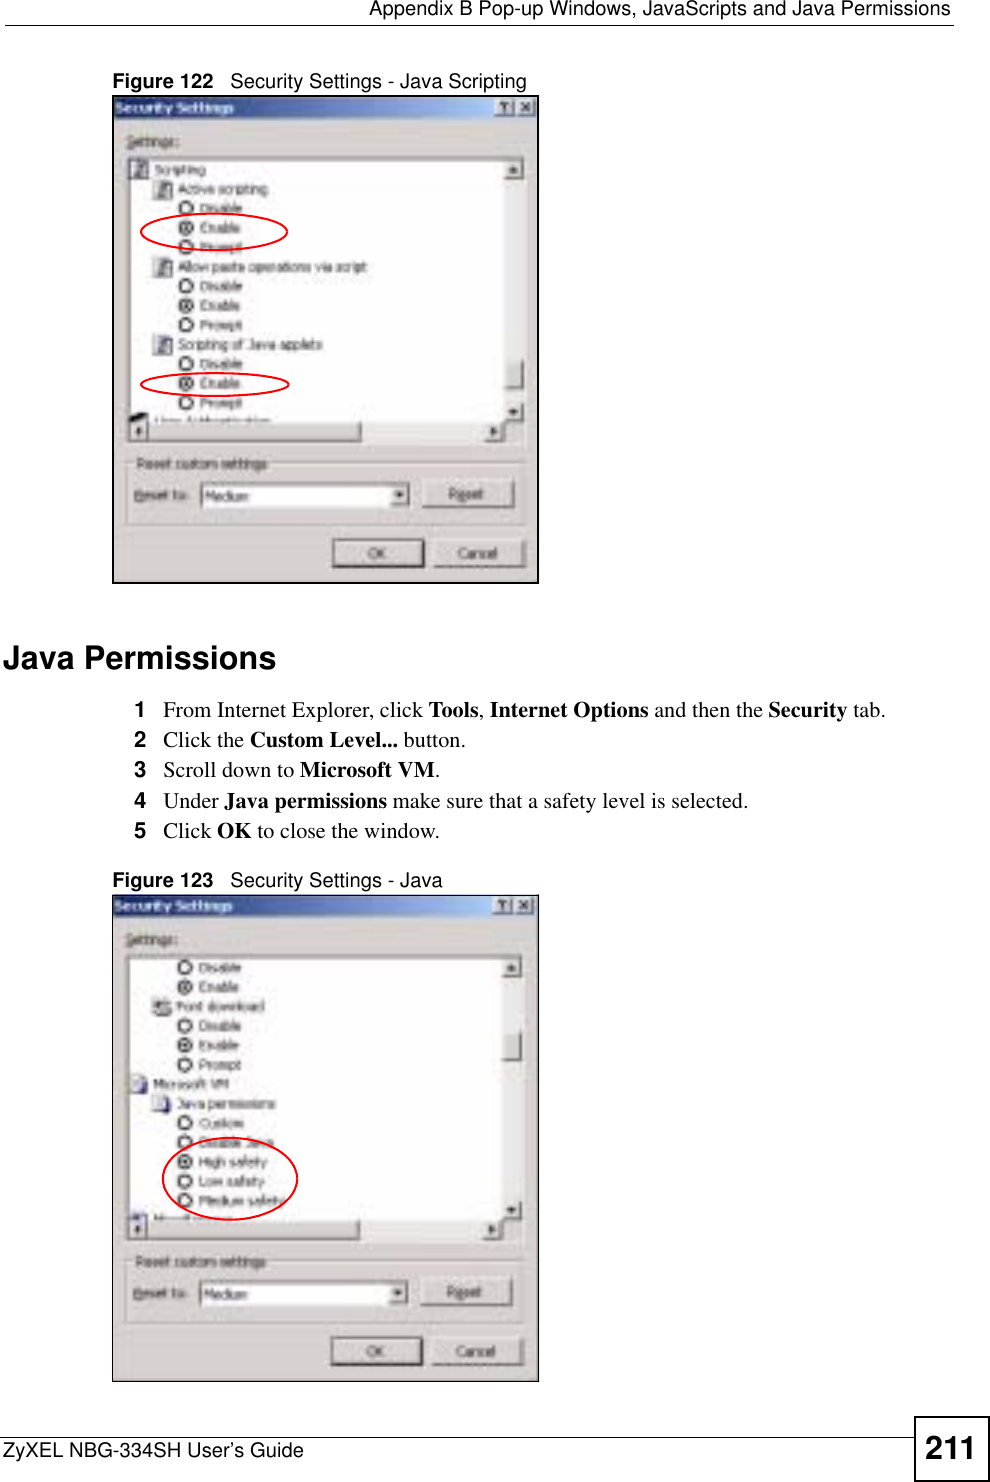  Appendix B Pop-up Windows, JavaScripts and Java PermissionsZyXEL NBG-334SH User’s Guide 211Figure 122   Security Settings - Java ScriptingJava Permissions1From Internet Explorer, click Tools,Internet Options and then the Security tab. 2Click the Custom Level... button. 3Scroll down to Microsoft VM.4Under Java permissions make sure that a safety level is selected.5Click OK to close the window.Figure 123   Security Settings - Java 